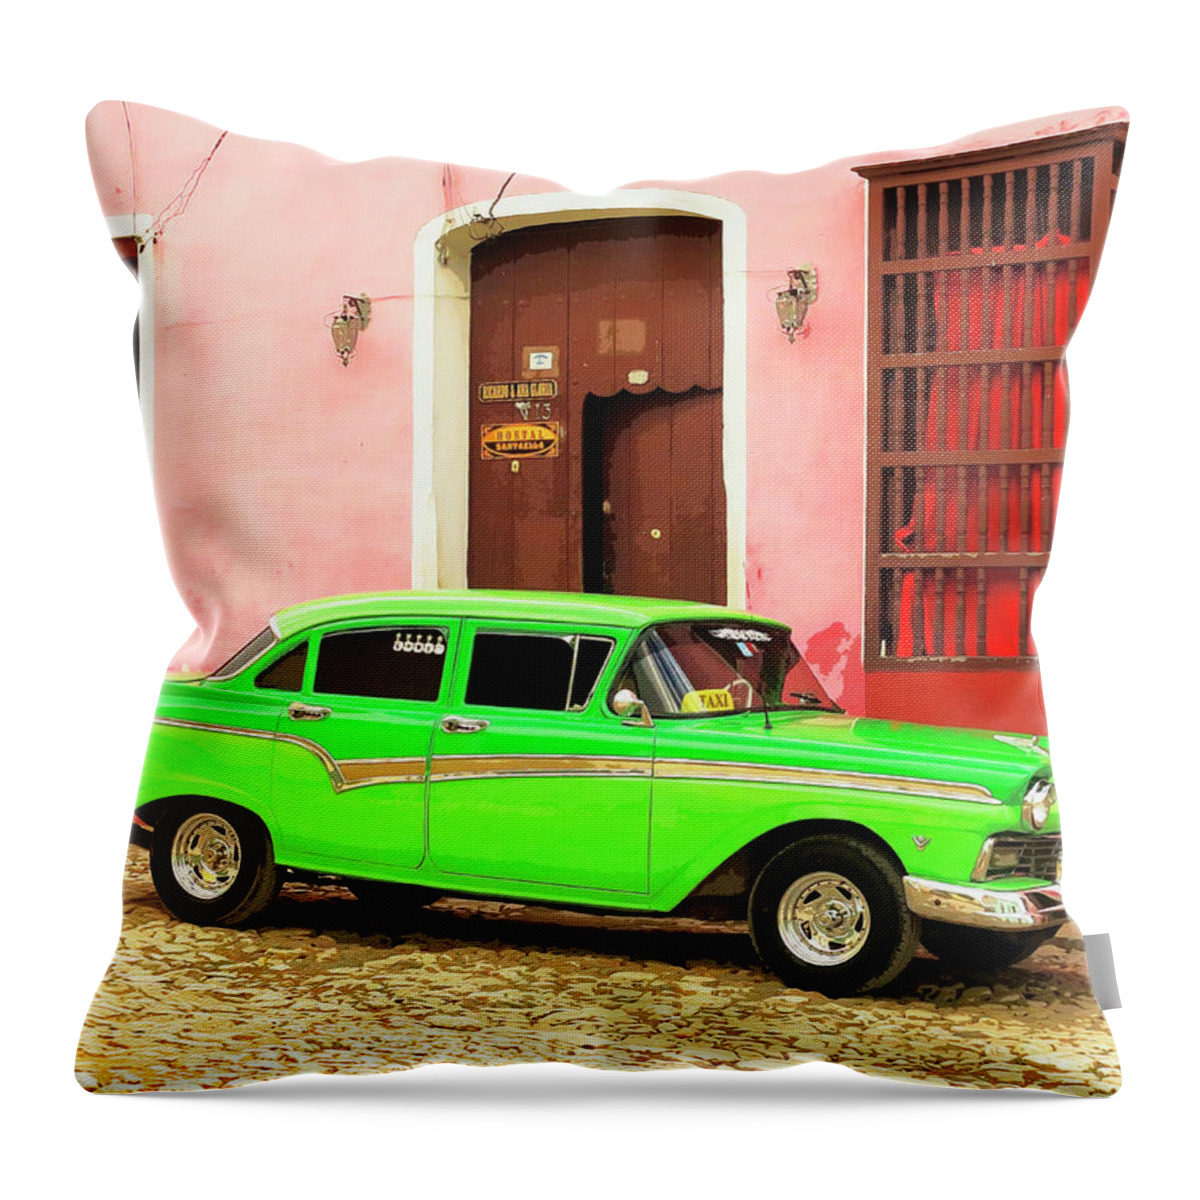 Havana Throw Pillow featuring the photograph The Green Weeny by Dominic Piperata